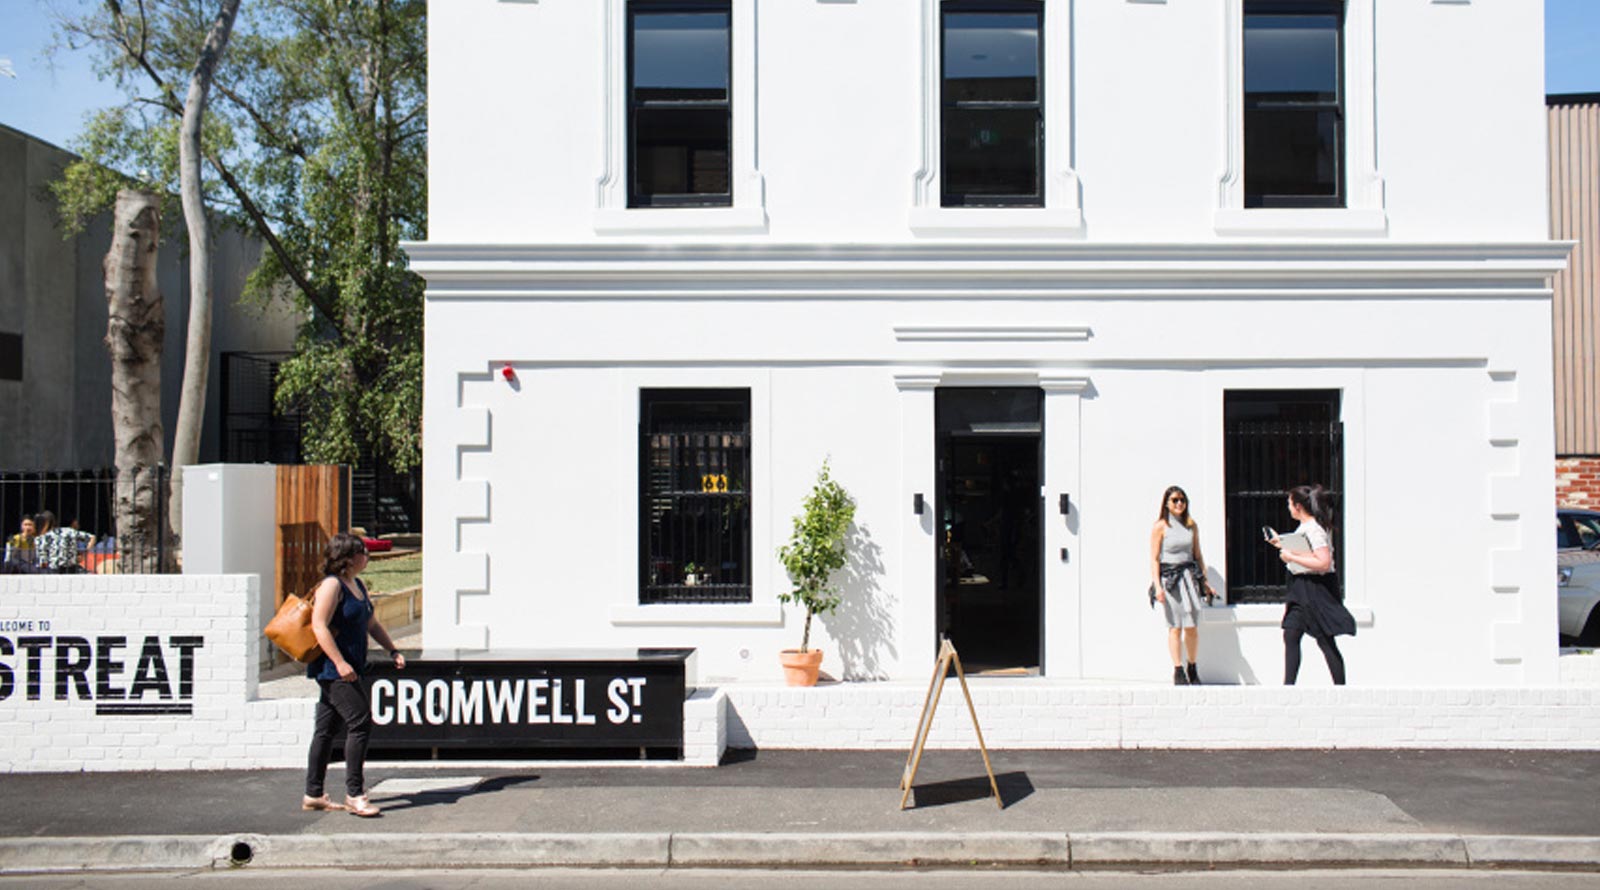 Cromwell St. was purchased for STREAT by the Harris family and redeveloped into a youth training academy, 80-seat cafe, artisan bakery, coffee roastery, catering business, function venue and head office. 